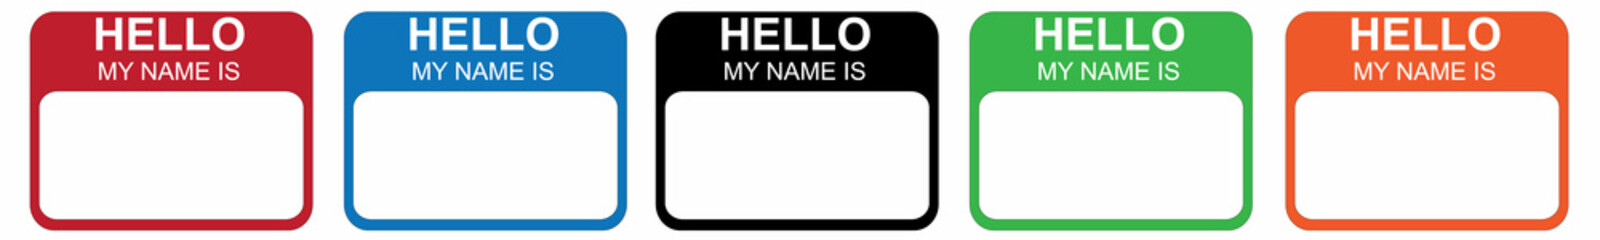 Hello my name cards set
